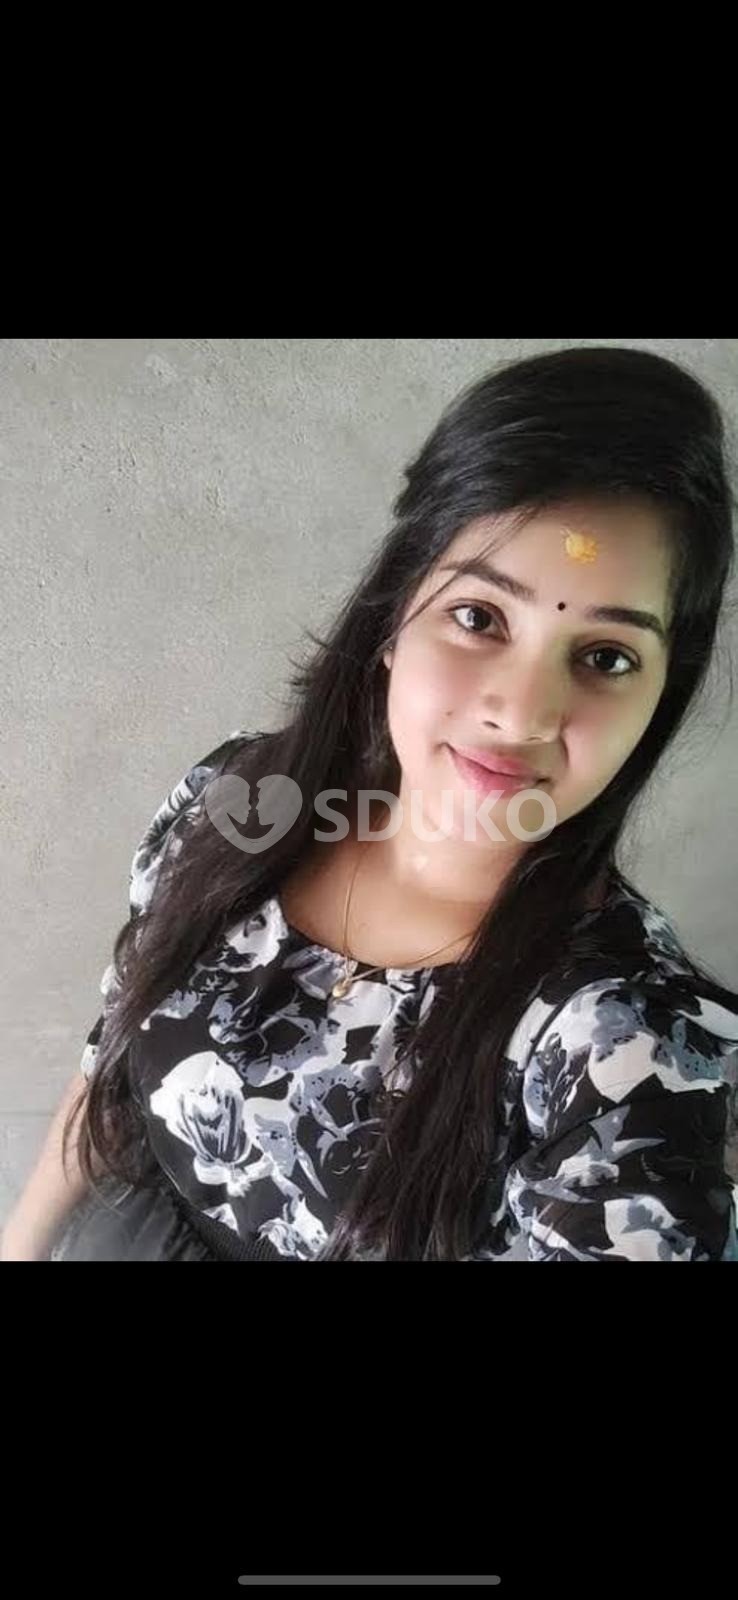 Navi Mumbai.............. low price 🥰100% SAFE AND SECURE TODAY LOW PRICE UNLIMITED ENJOY HOT COLLEGE GIRL HOUSEWIFE 